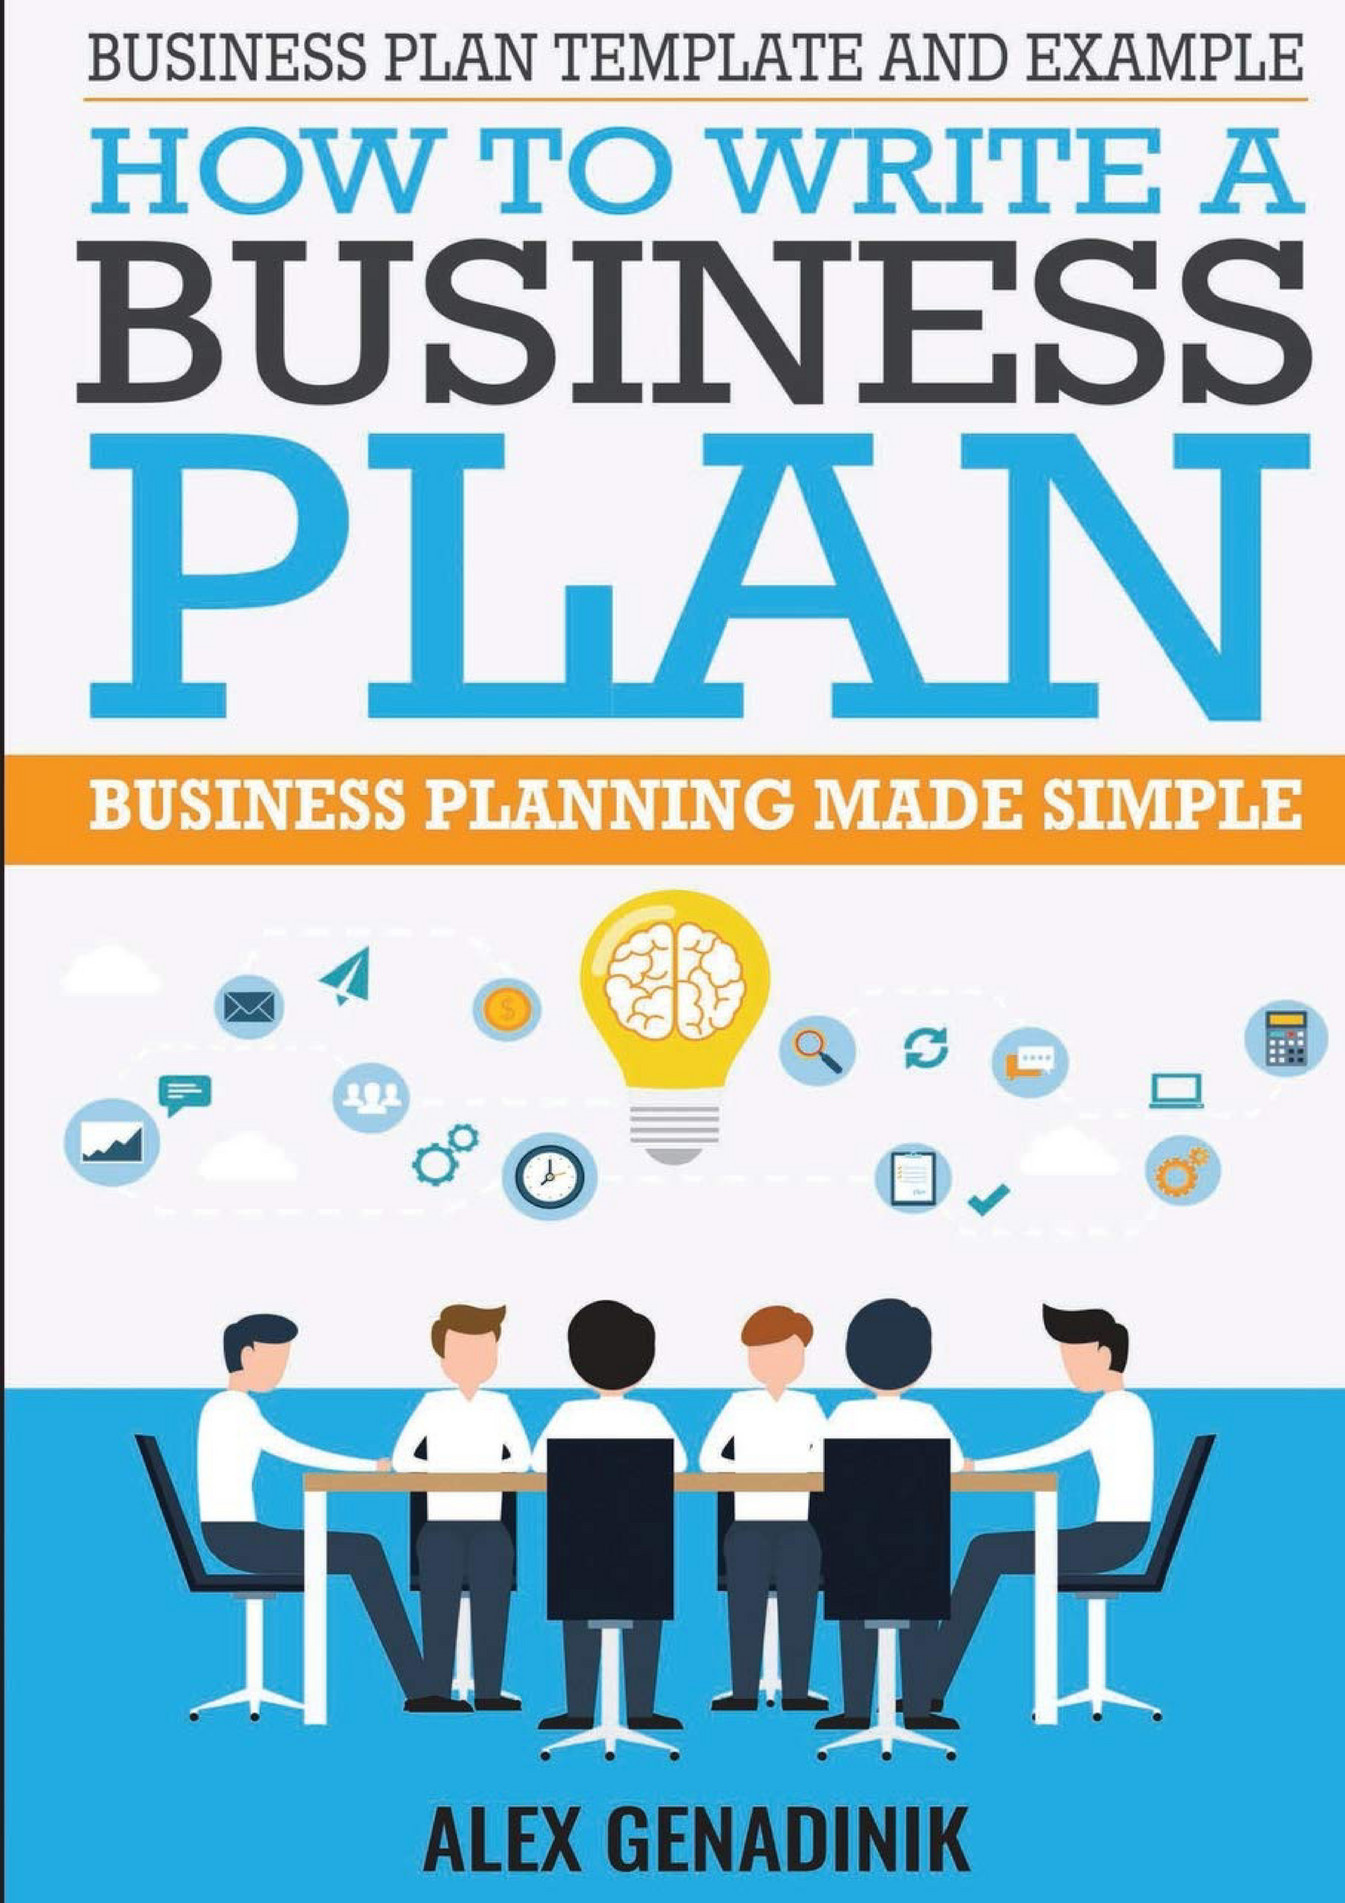 Milton Business Plan Template And Example How To Write A Business Plan Business Planning Made